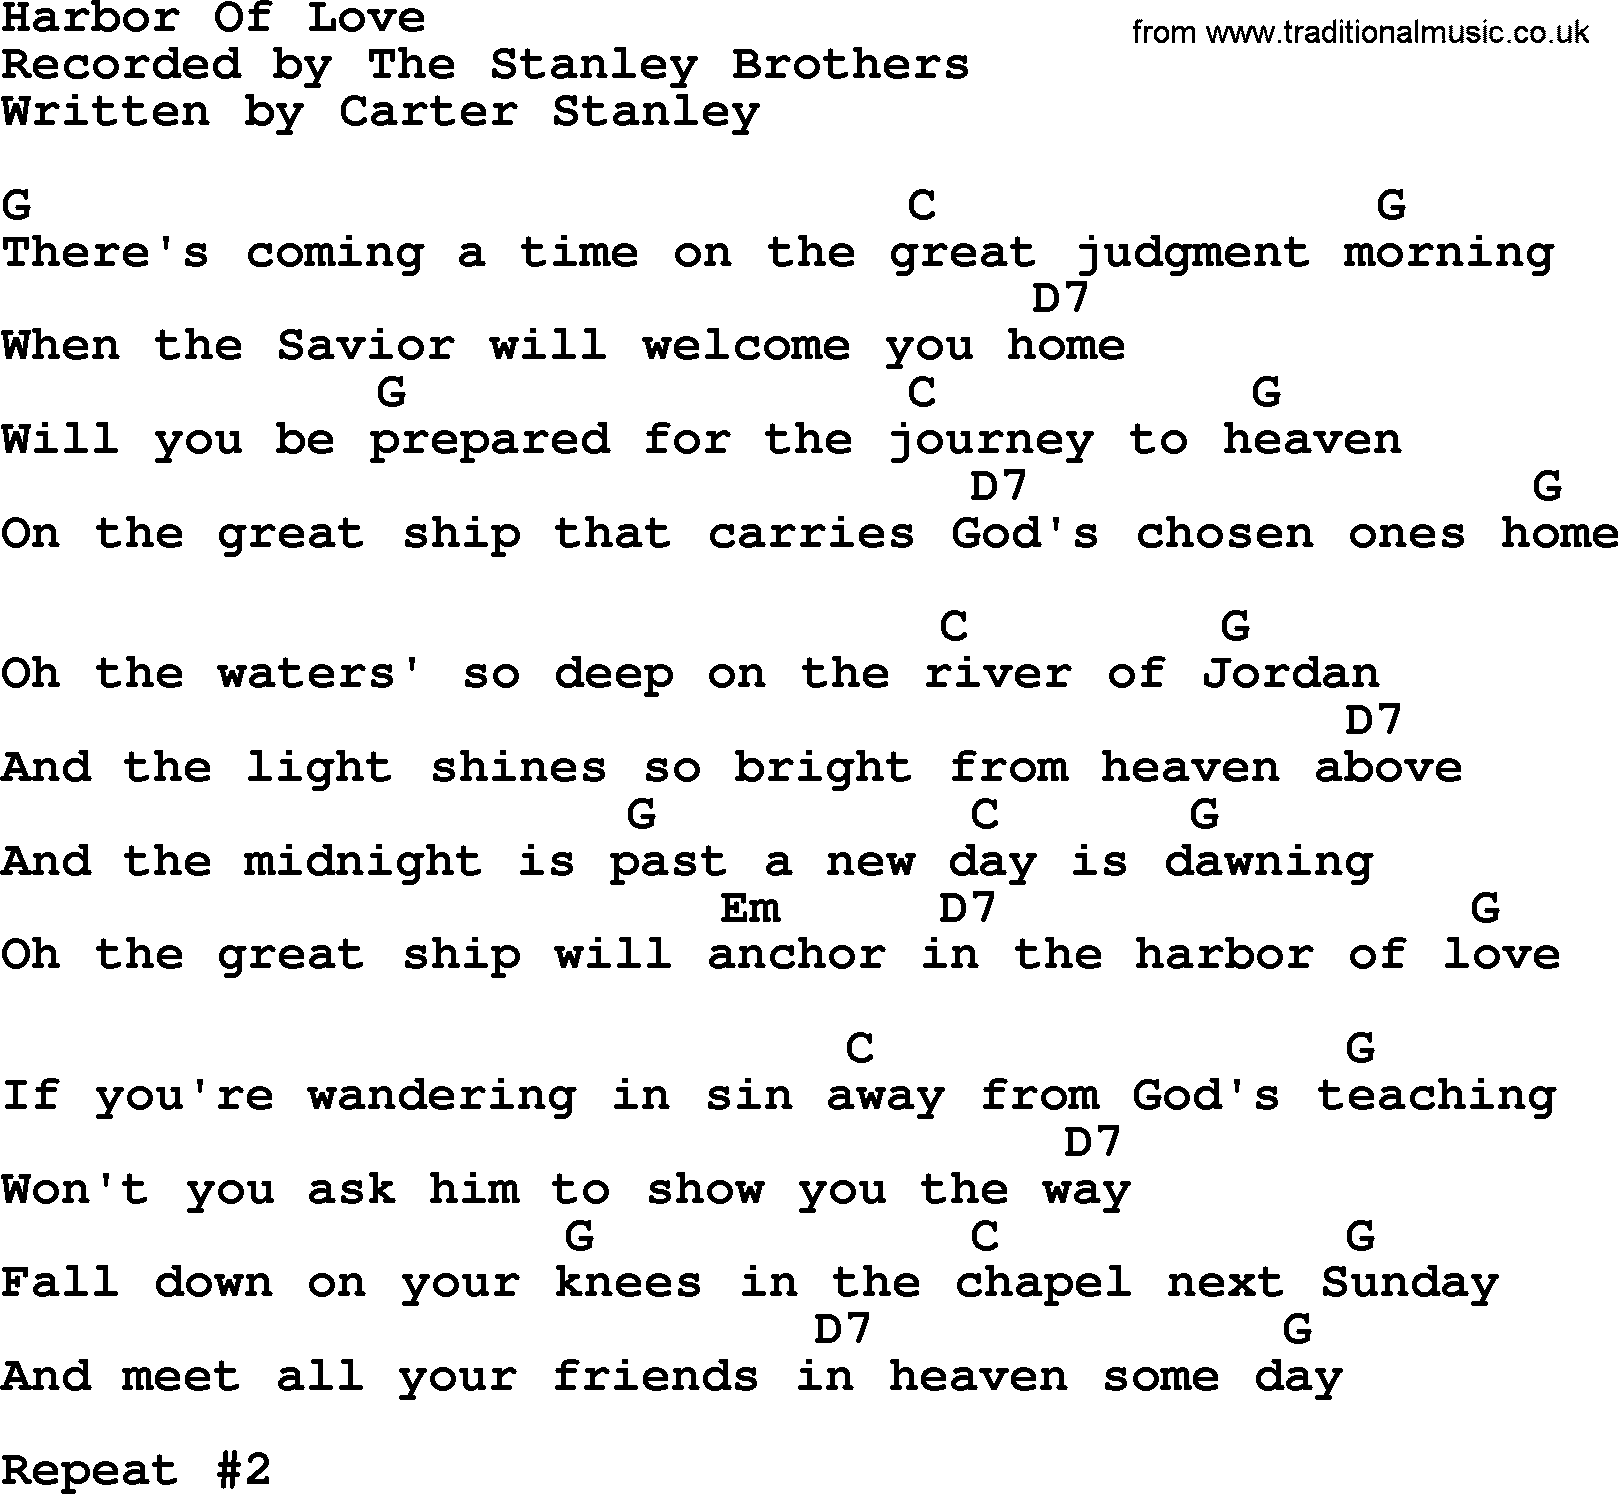 Bluegrass song: Harbor Of Love, lyrics and chords